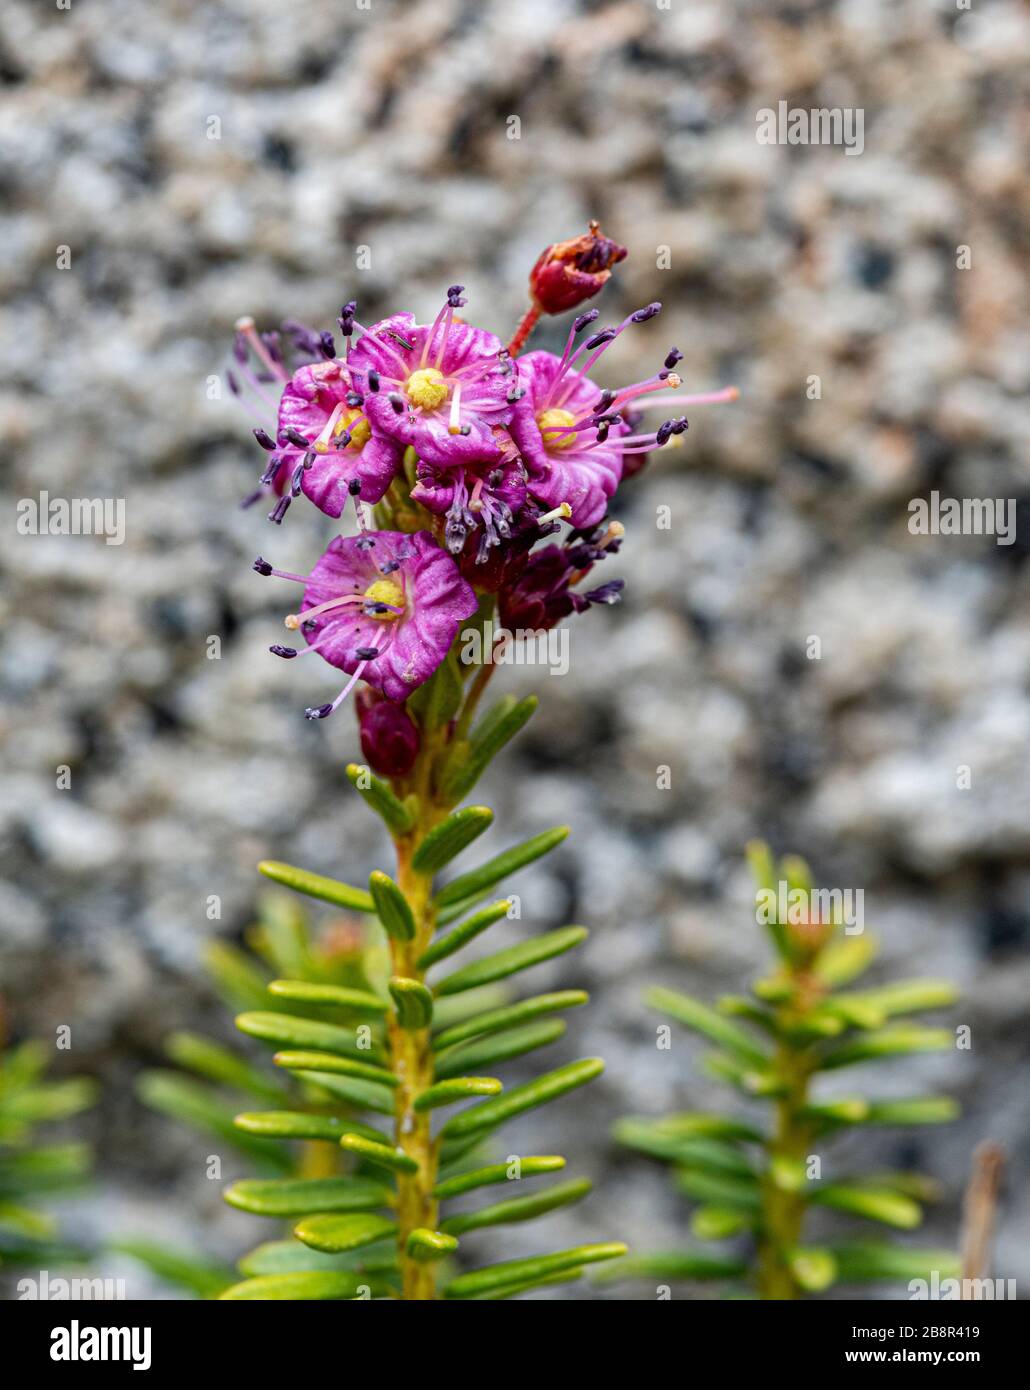 Kalmia microphylla, aka Alpine laurel, grows at elevation in the western United States, photographed in Sequoia National Park. Stock Photo